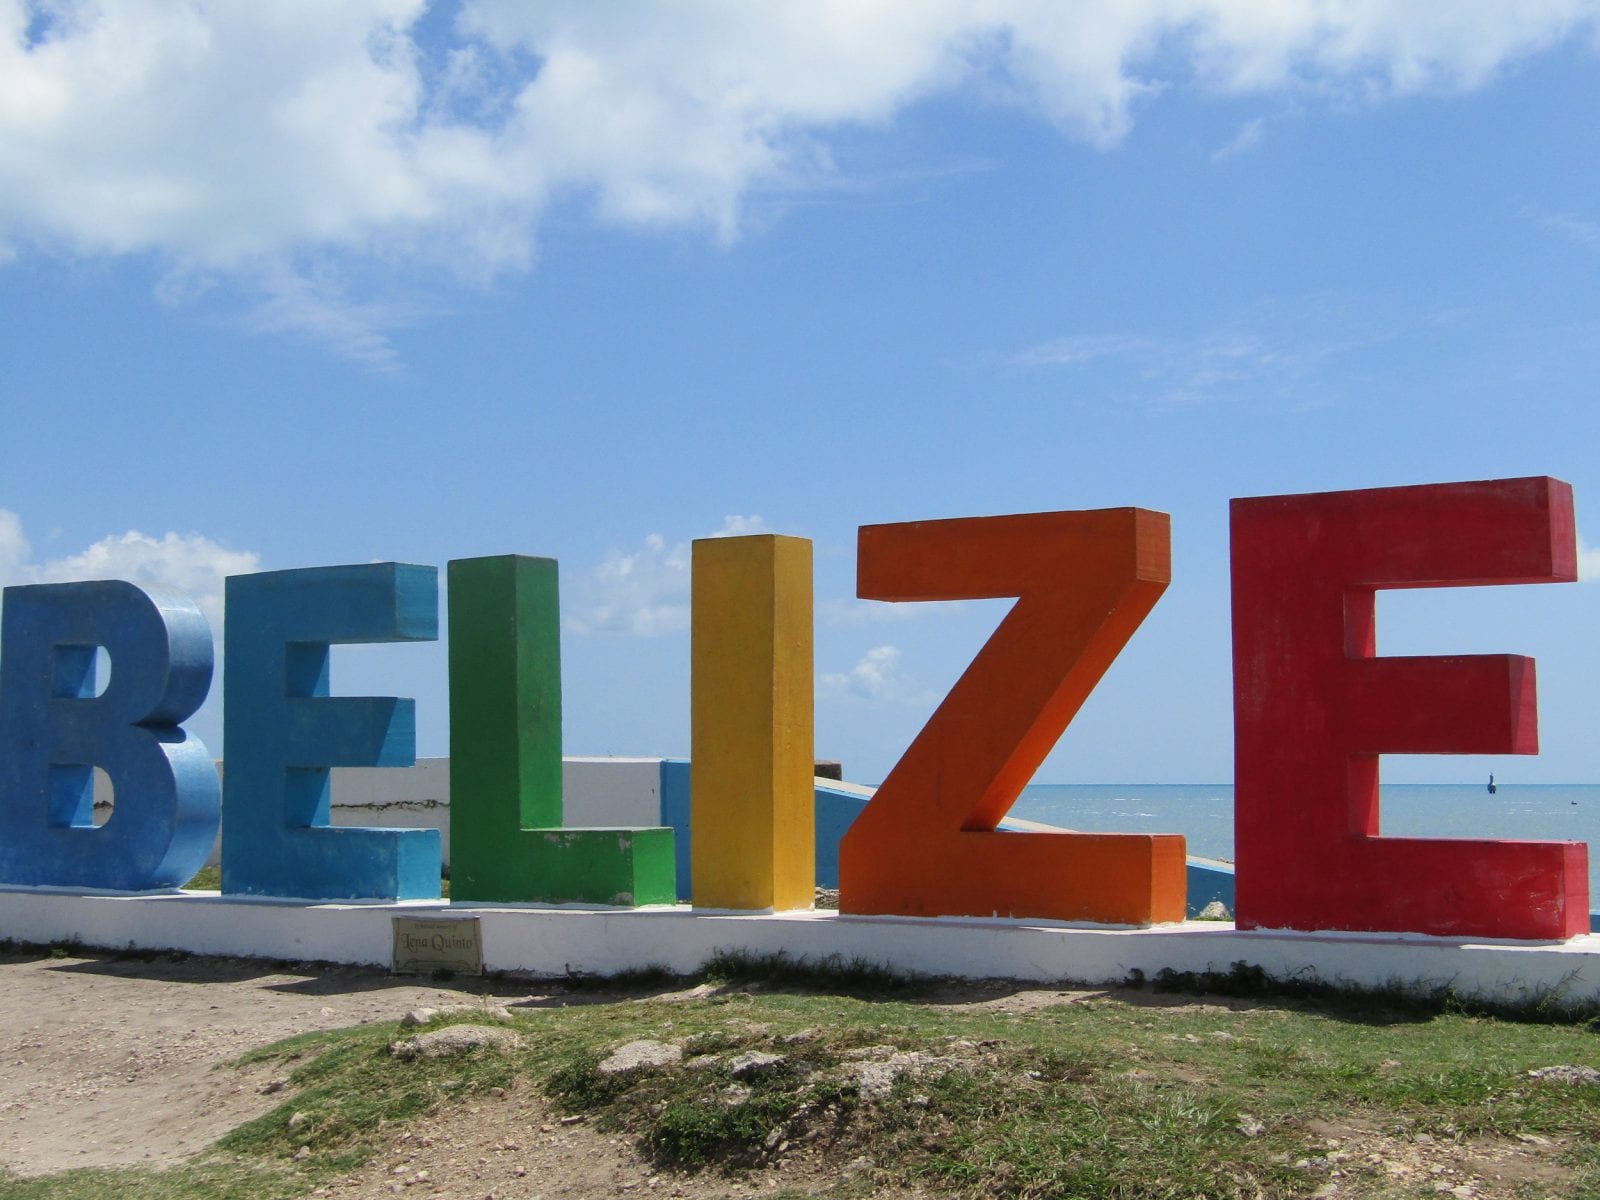  Belize sign on the shore in Belize City. 